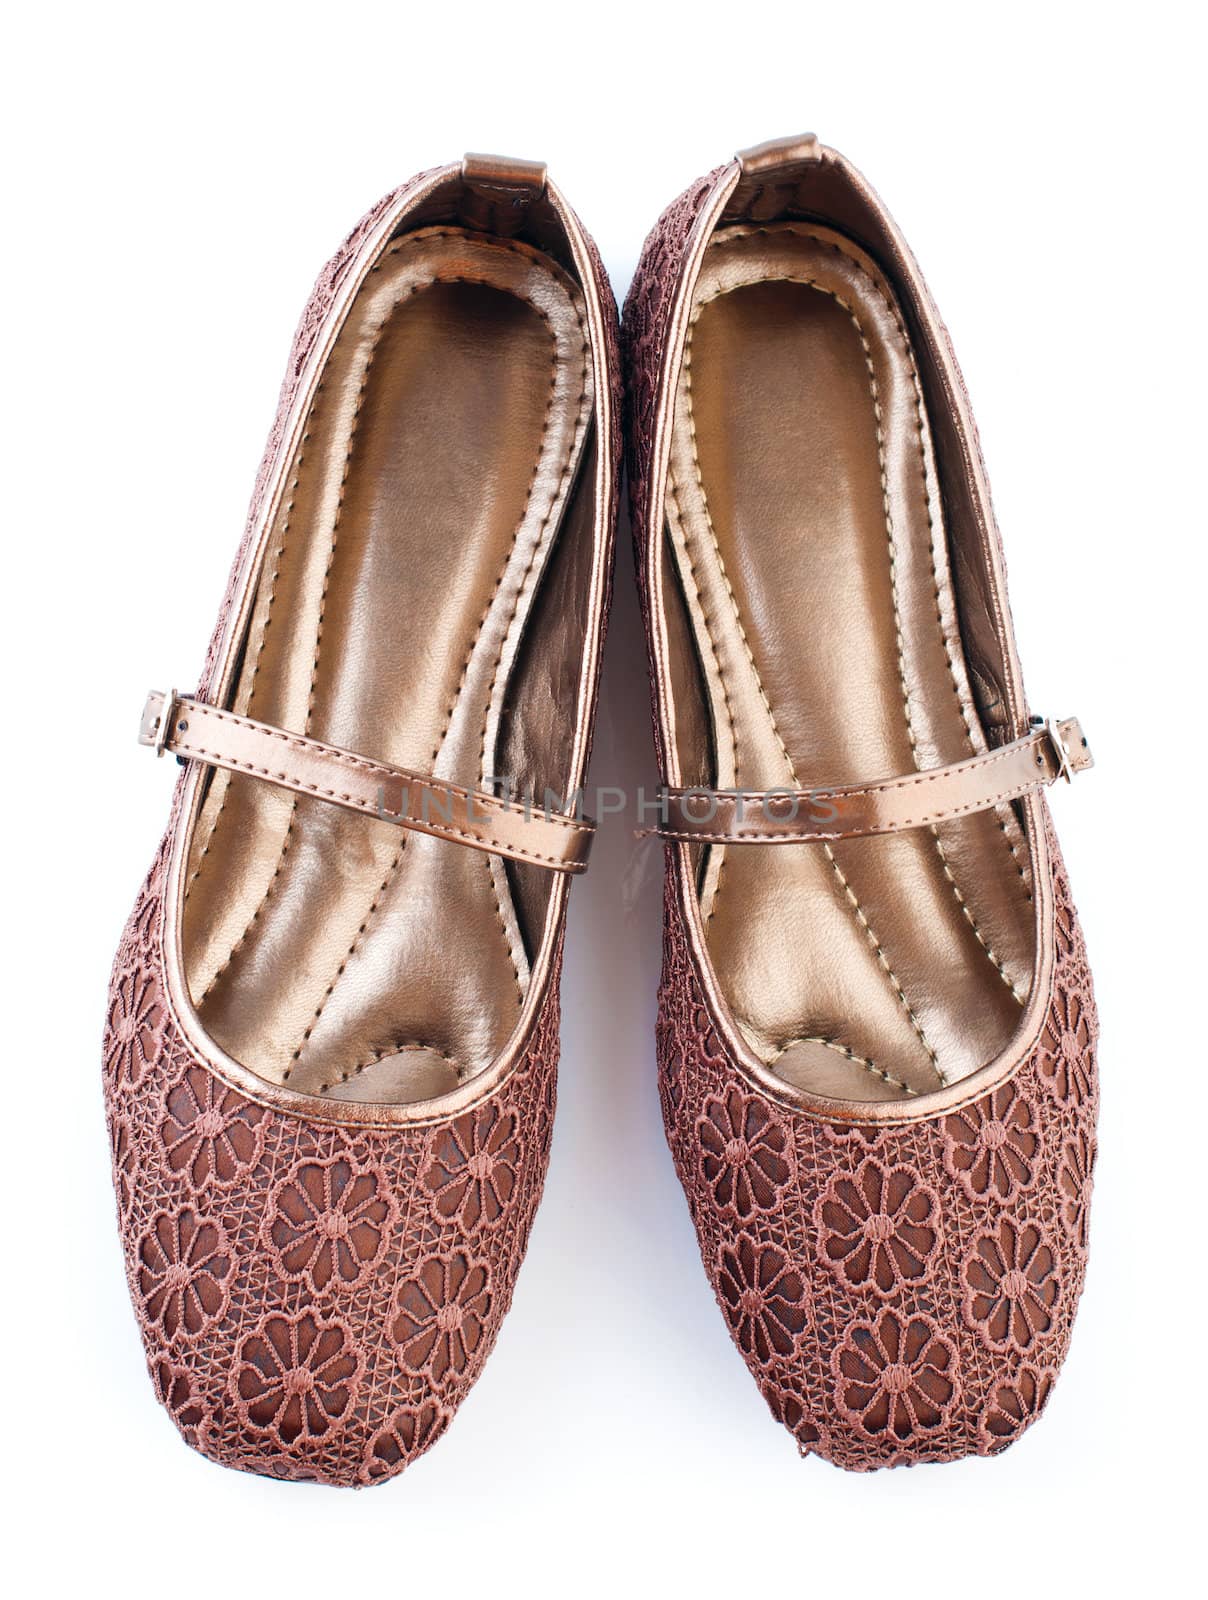 Brown lace casual woman shoes  by szefei